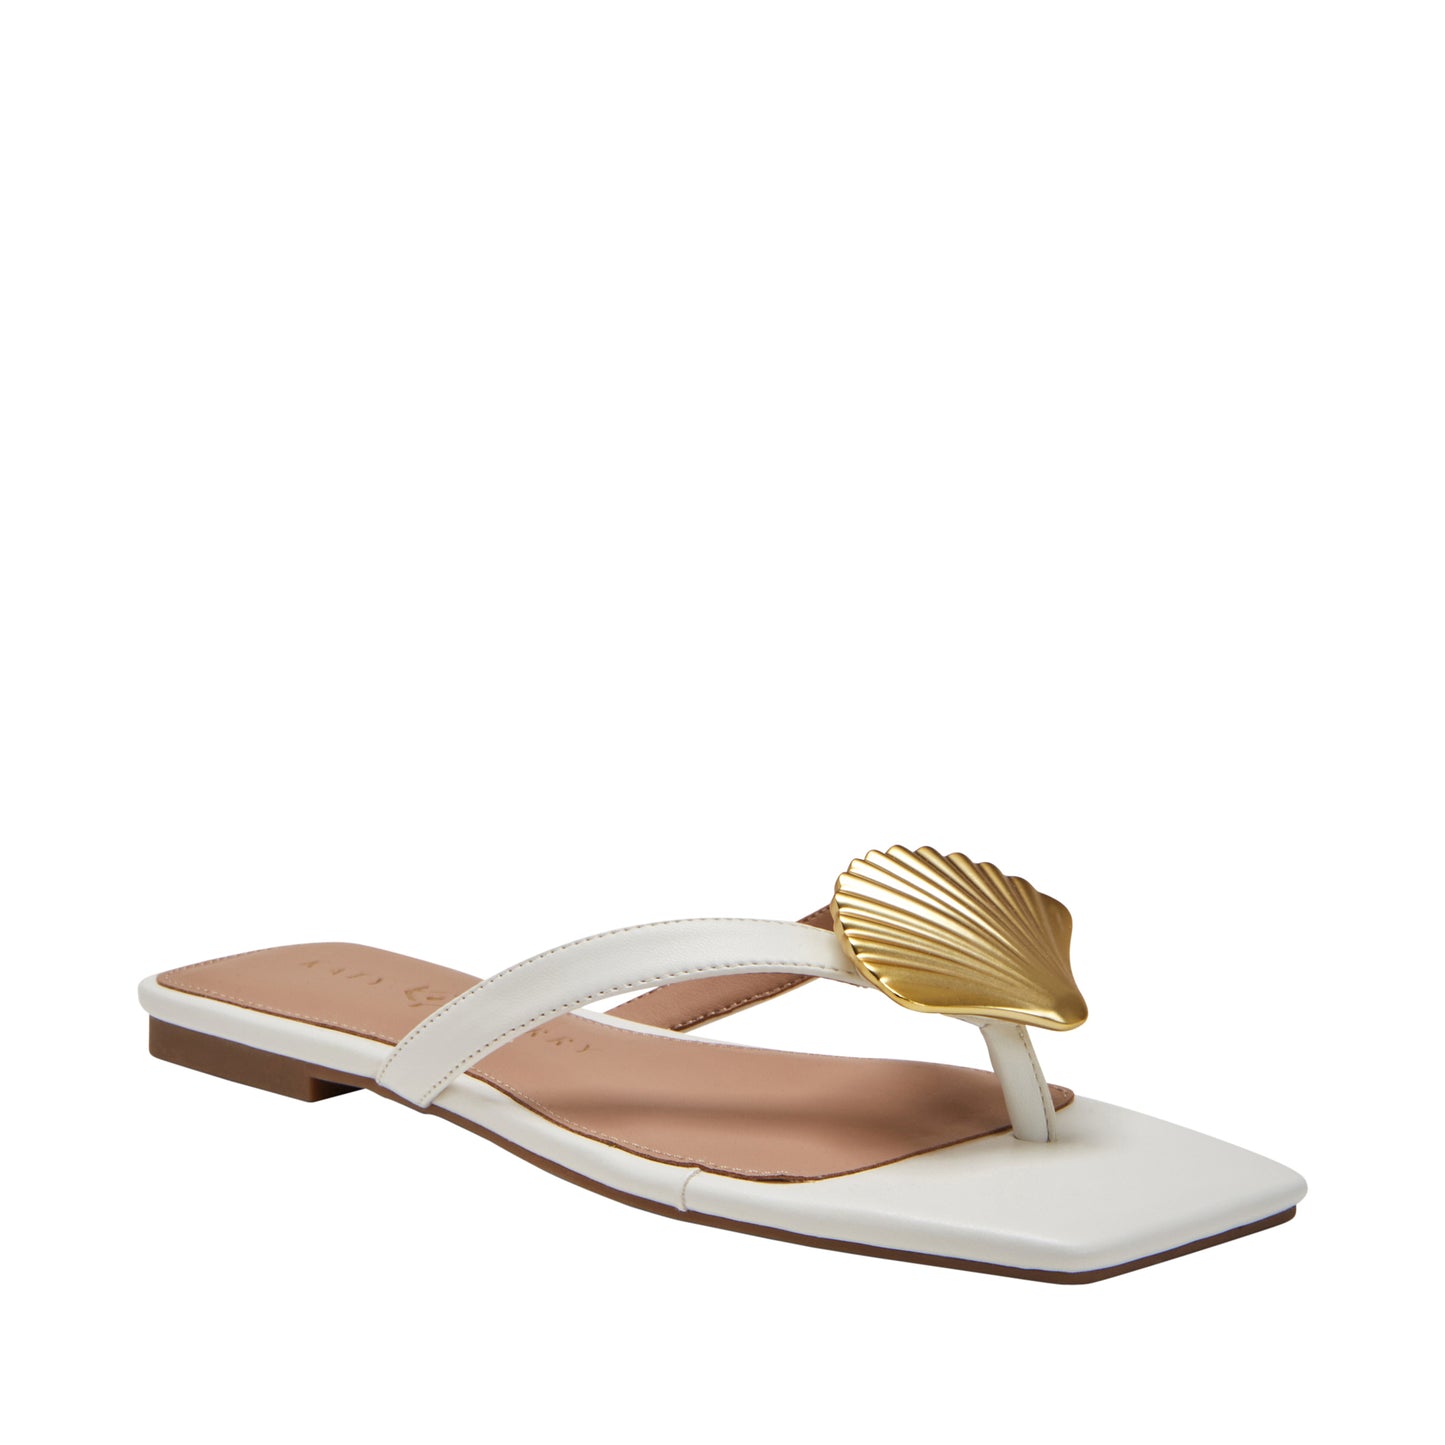 THE CAMIE SHELL SANDAL